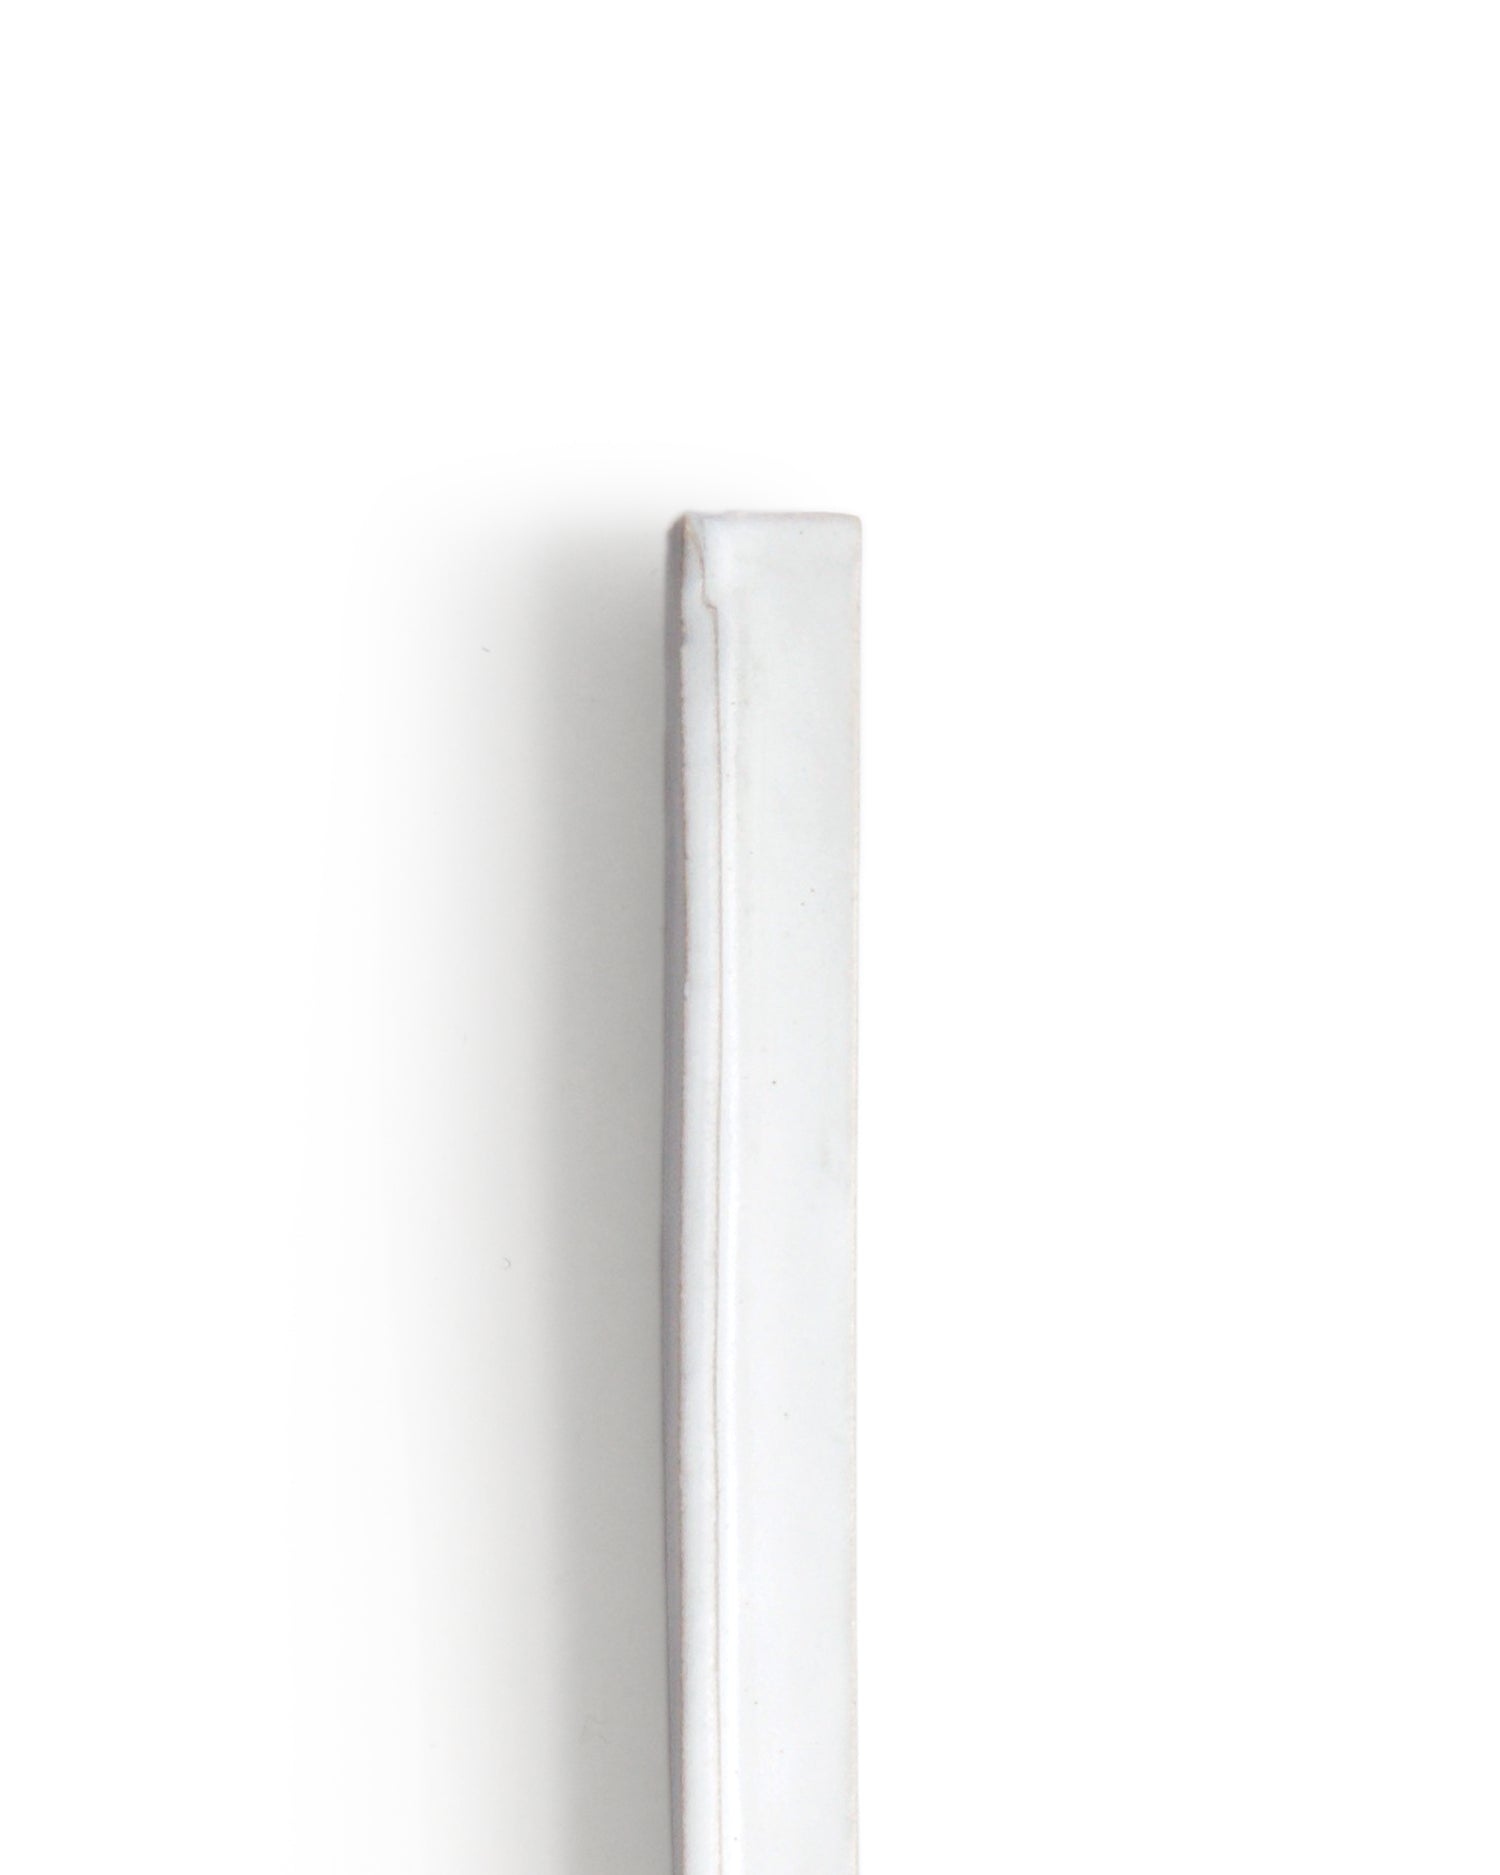 Zoomed-in image of top of ceramic slim white hanging vase with edge with white over glaze by Masanobu Ando against white background.